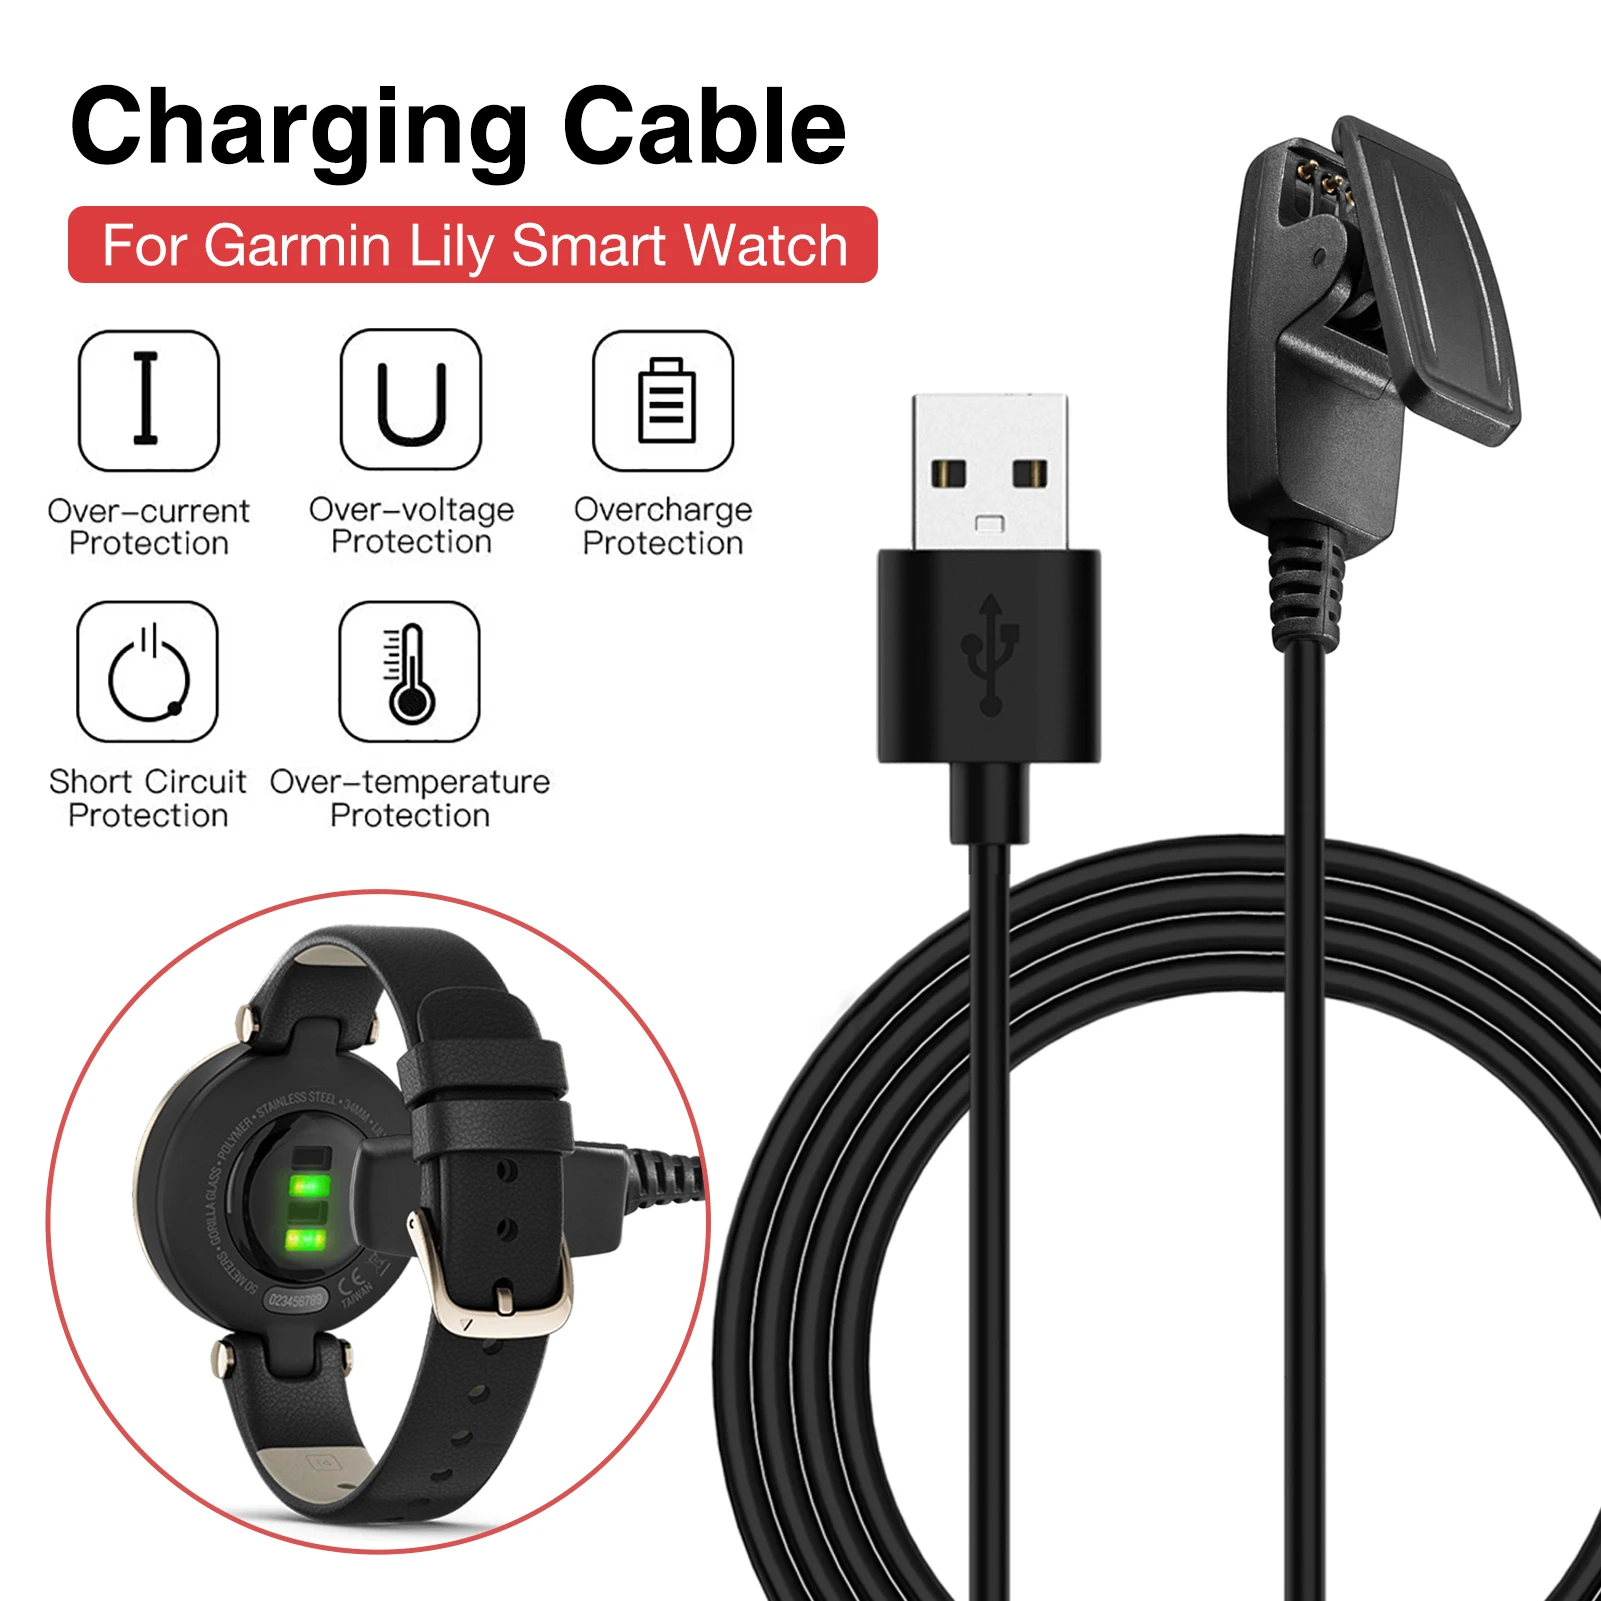 

Charger Dock Magnetic USB Charging Cable for Garmin Lily Smart Wa Smart watch charger Black Smart wearable accessories Dropship